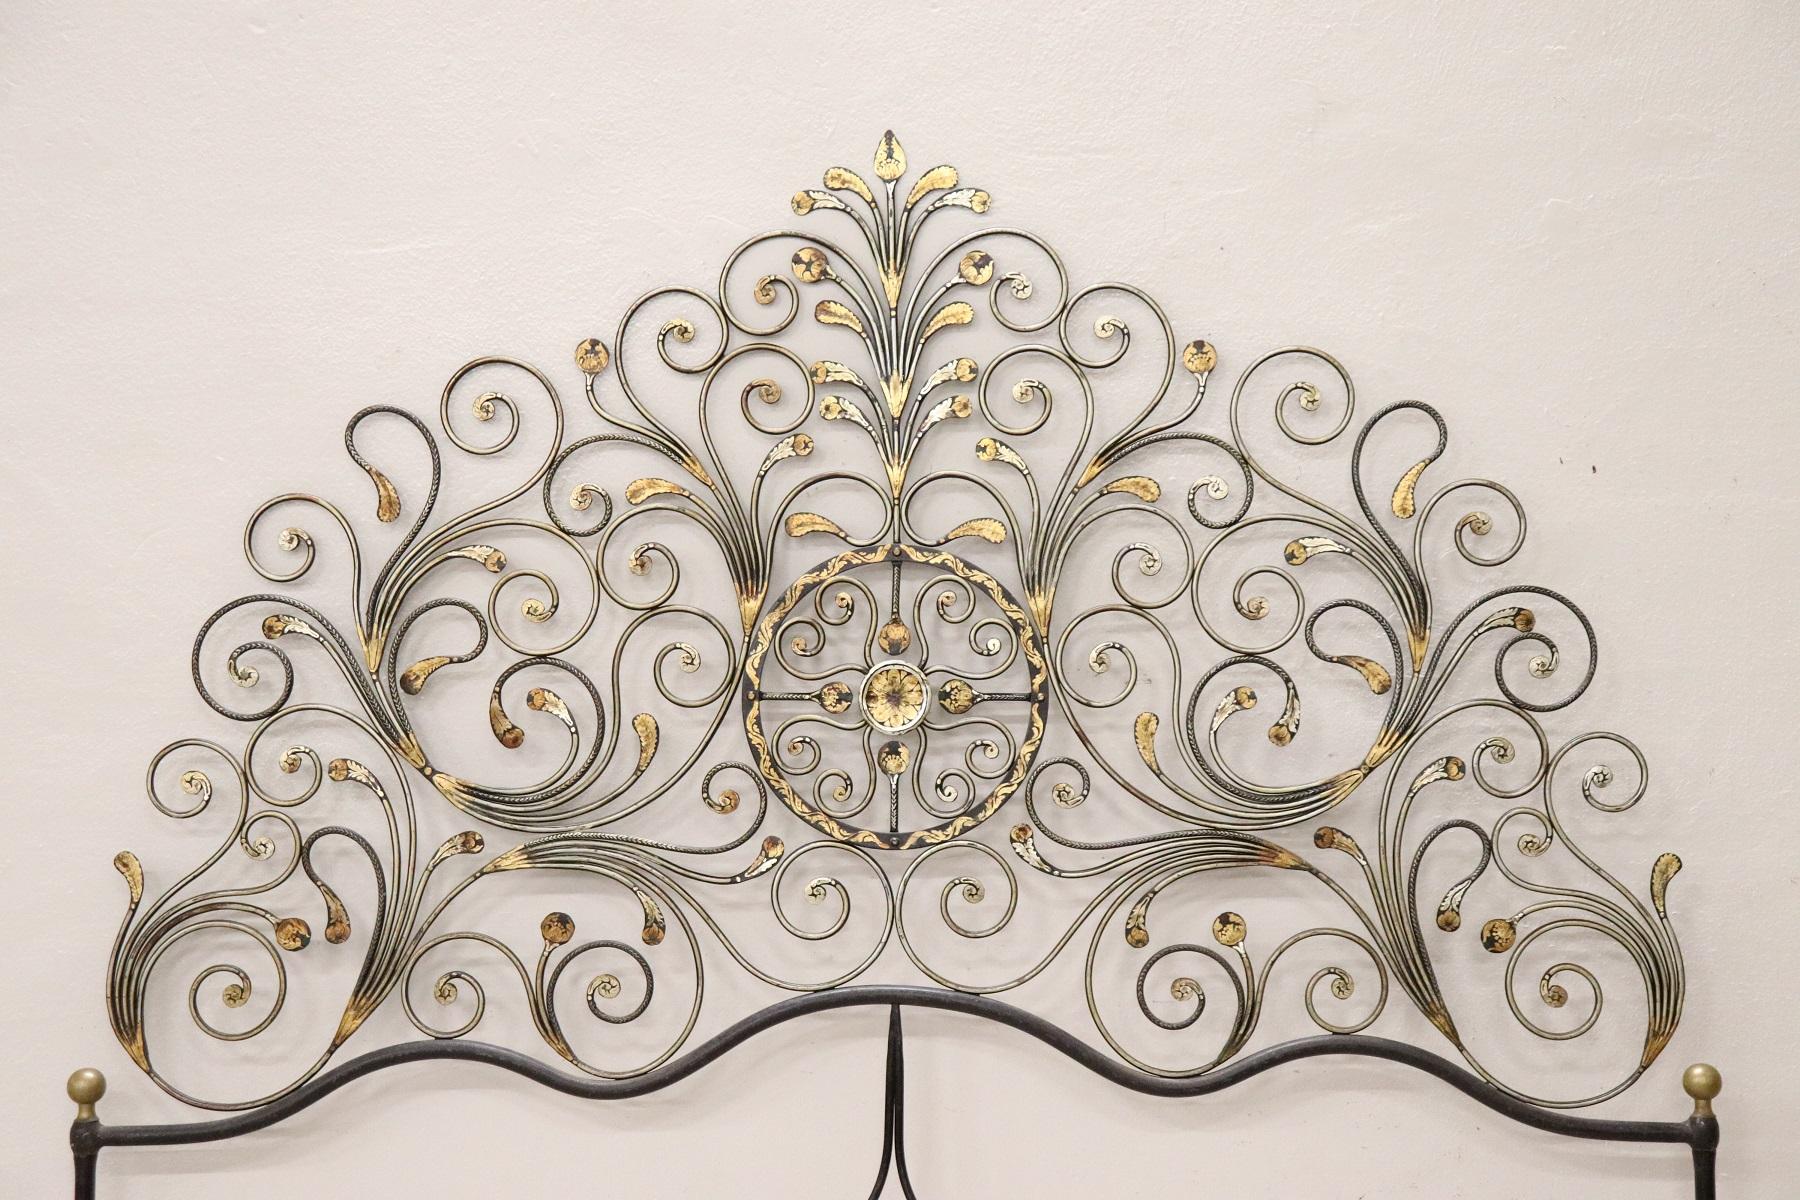 Italian Baroque style bed frame. Rich double bed headboard in gilded wrought iron. Great woodwork with lots of curls and swirls of typical Italian Baroque taste. This type of beds in Italy were typical of the city of Genoa and were called peacock